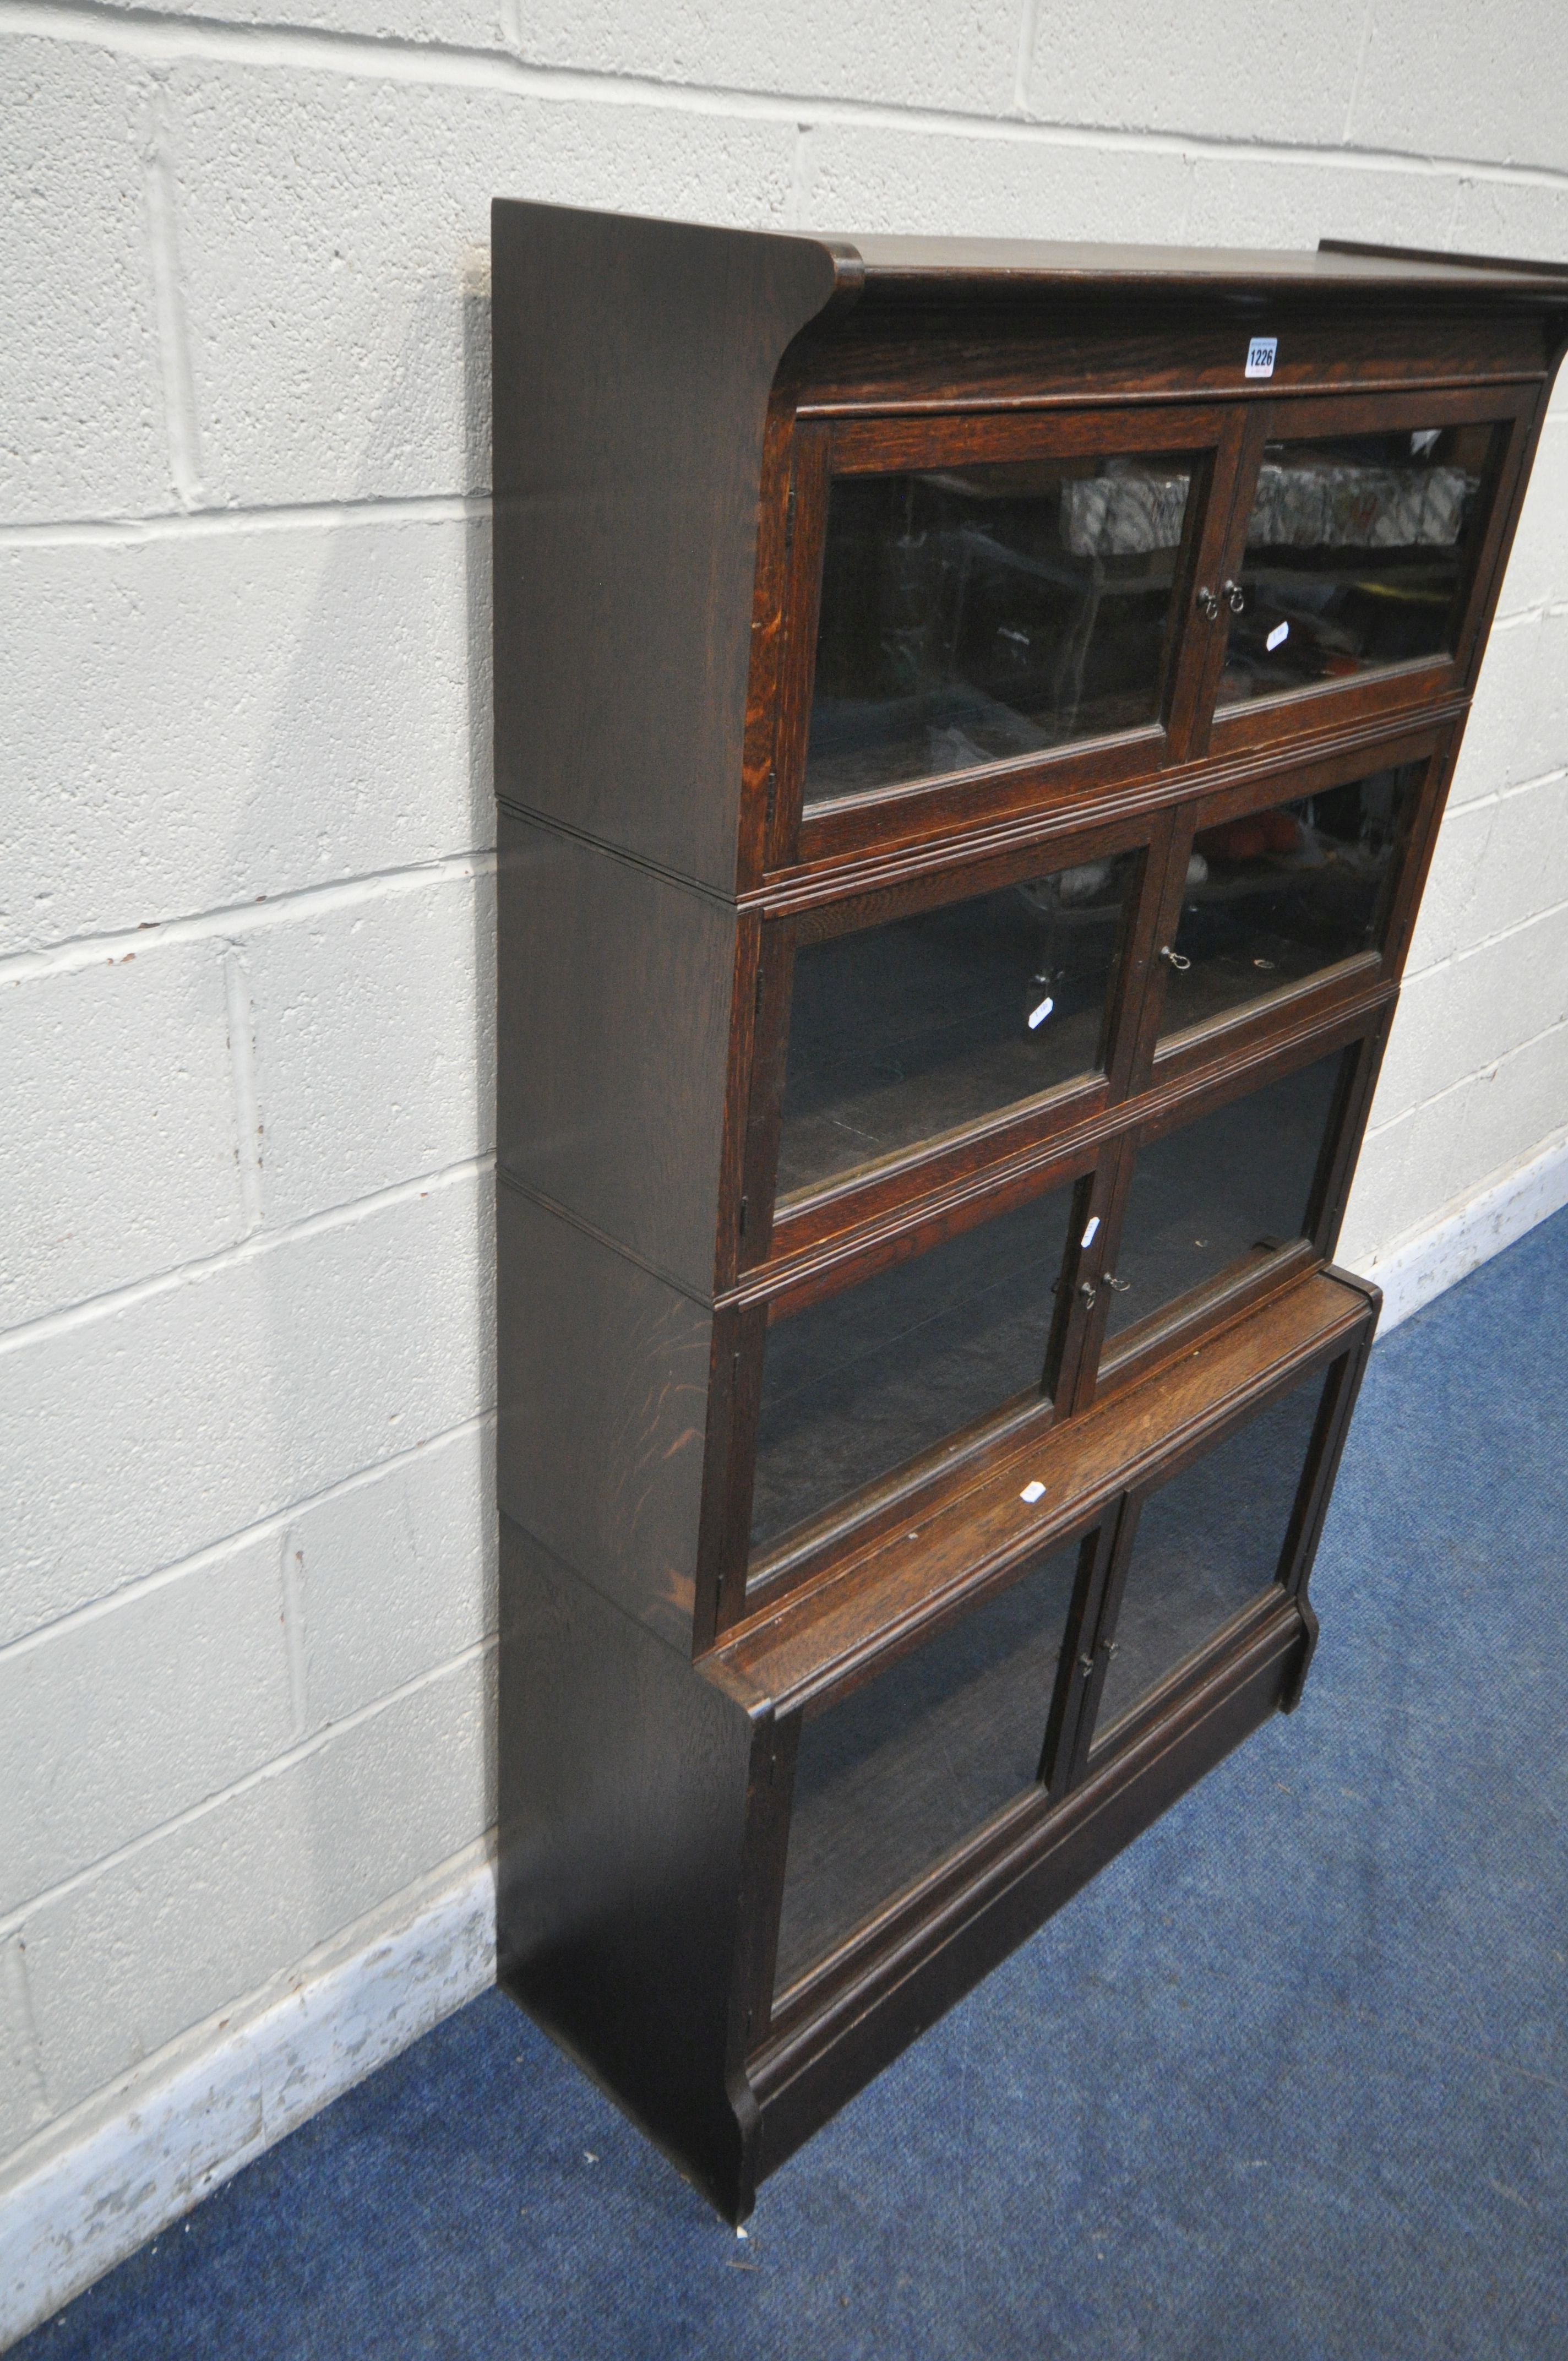 W M BAKER AND CO, OXFORD, AN EARLY 20TH CENTURY OAK SECTIONAL BOOKCASE, with one deep bottom section - Image 2 of 6